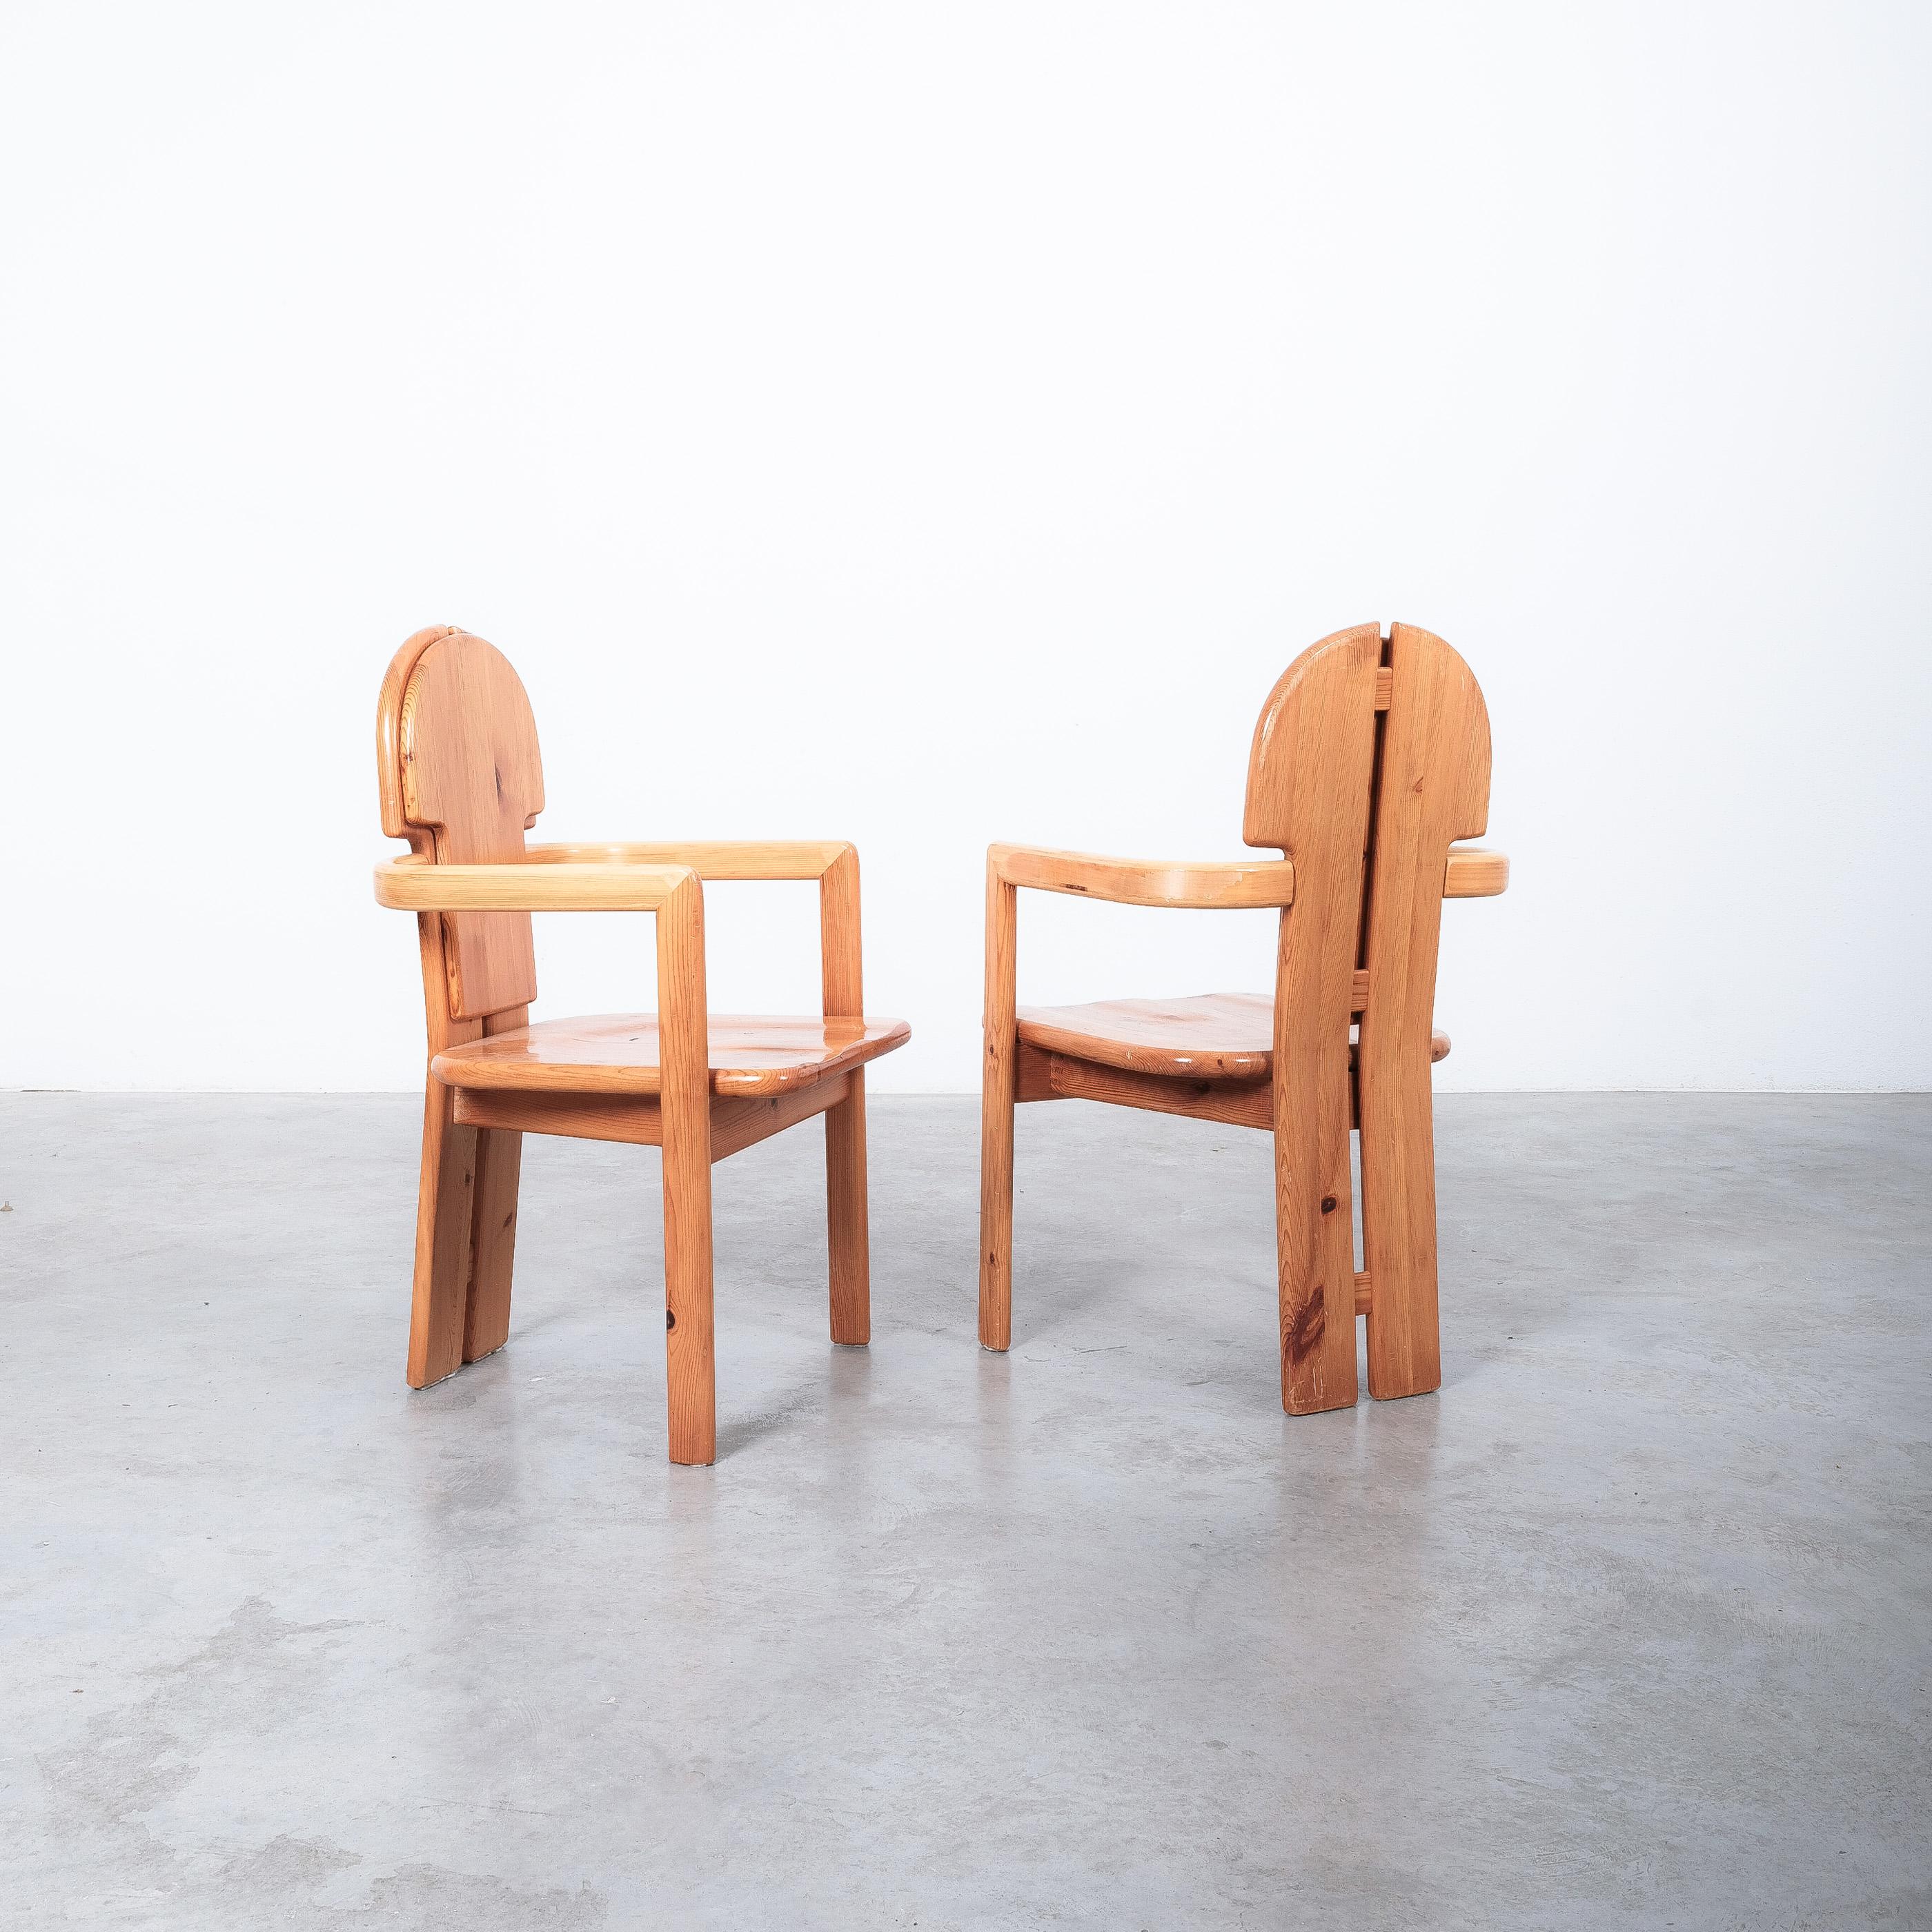 Pair of pine wood armchairs by the Danish architect Rainer Daumiller, produced by Hirtshals Sawmill during the 1970s.

Sold as a set of 2 pieces, we have another set of six Daumiller chairs available that can be combined with these (see